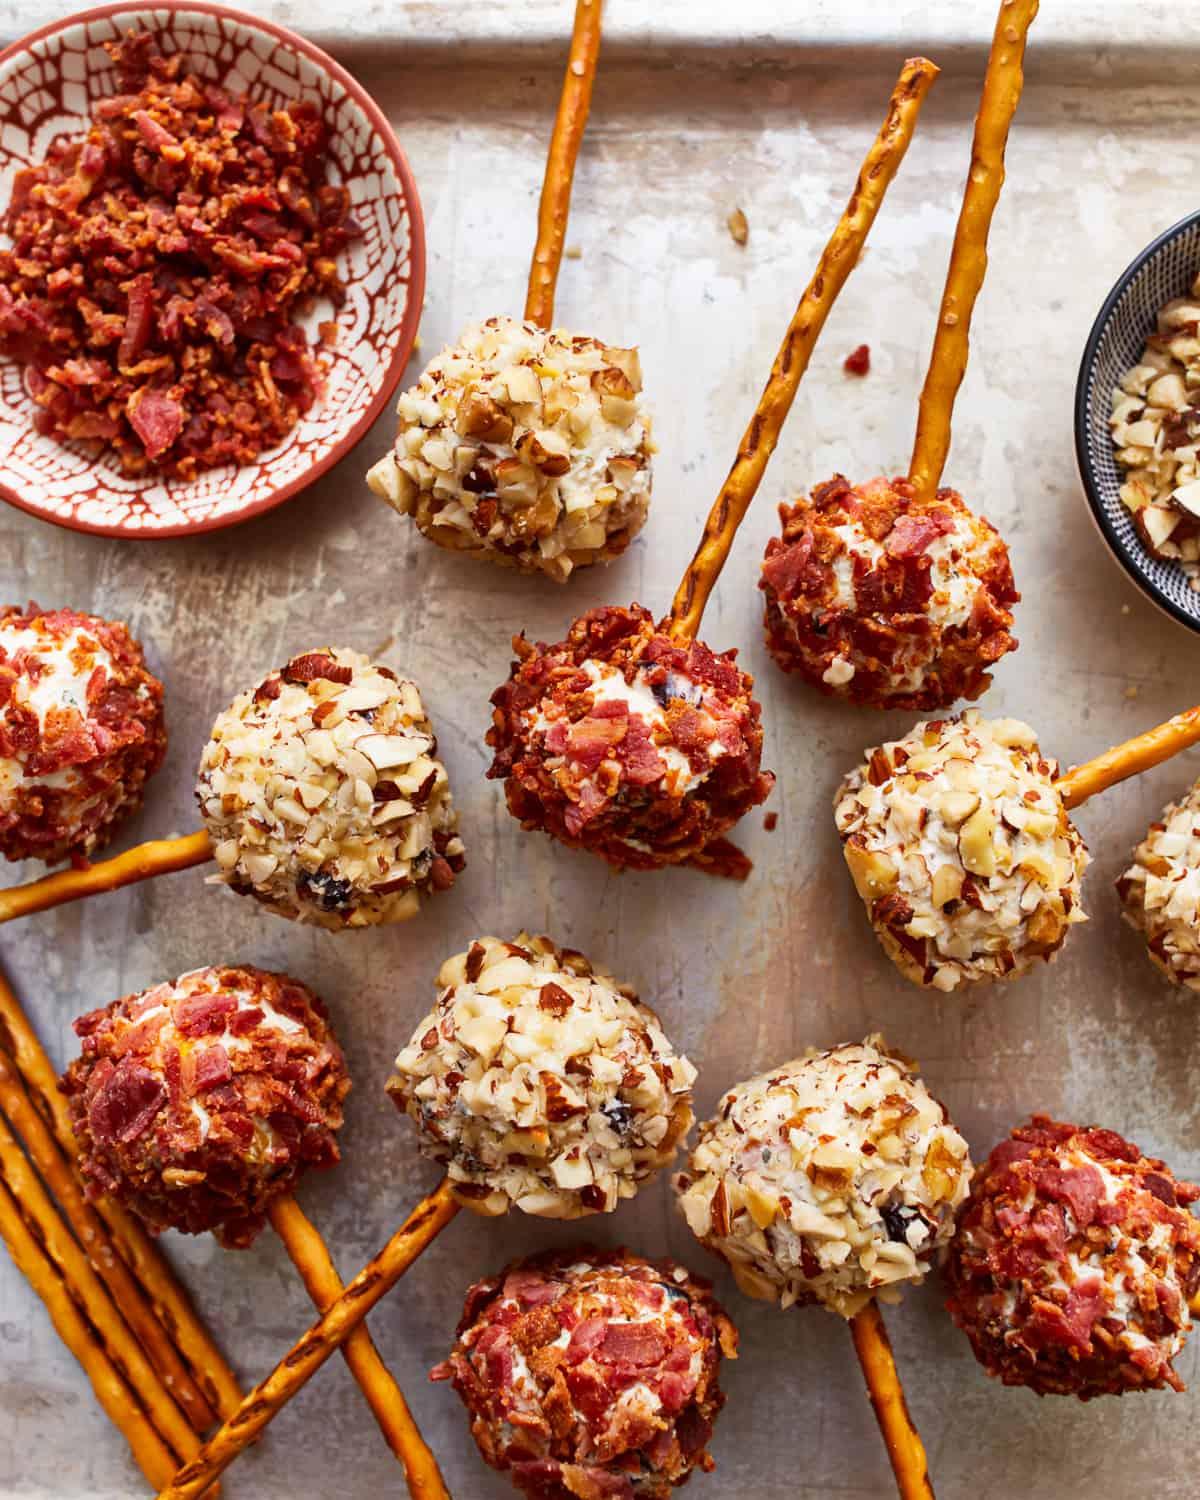 A tray of cheese ball bites on pretzel sticks, coated in bacon and chopped nuts.